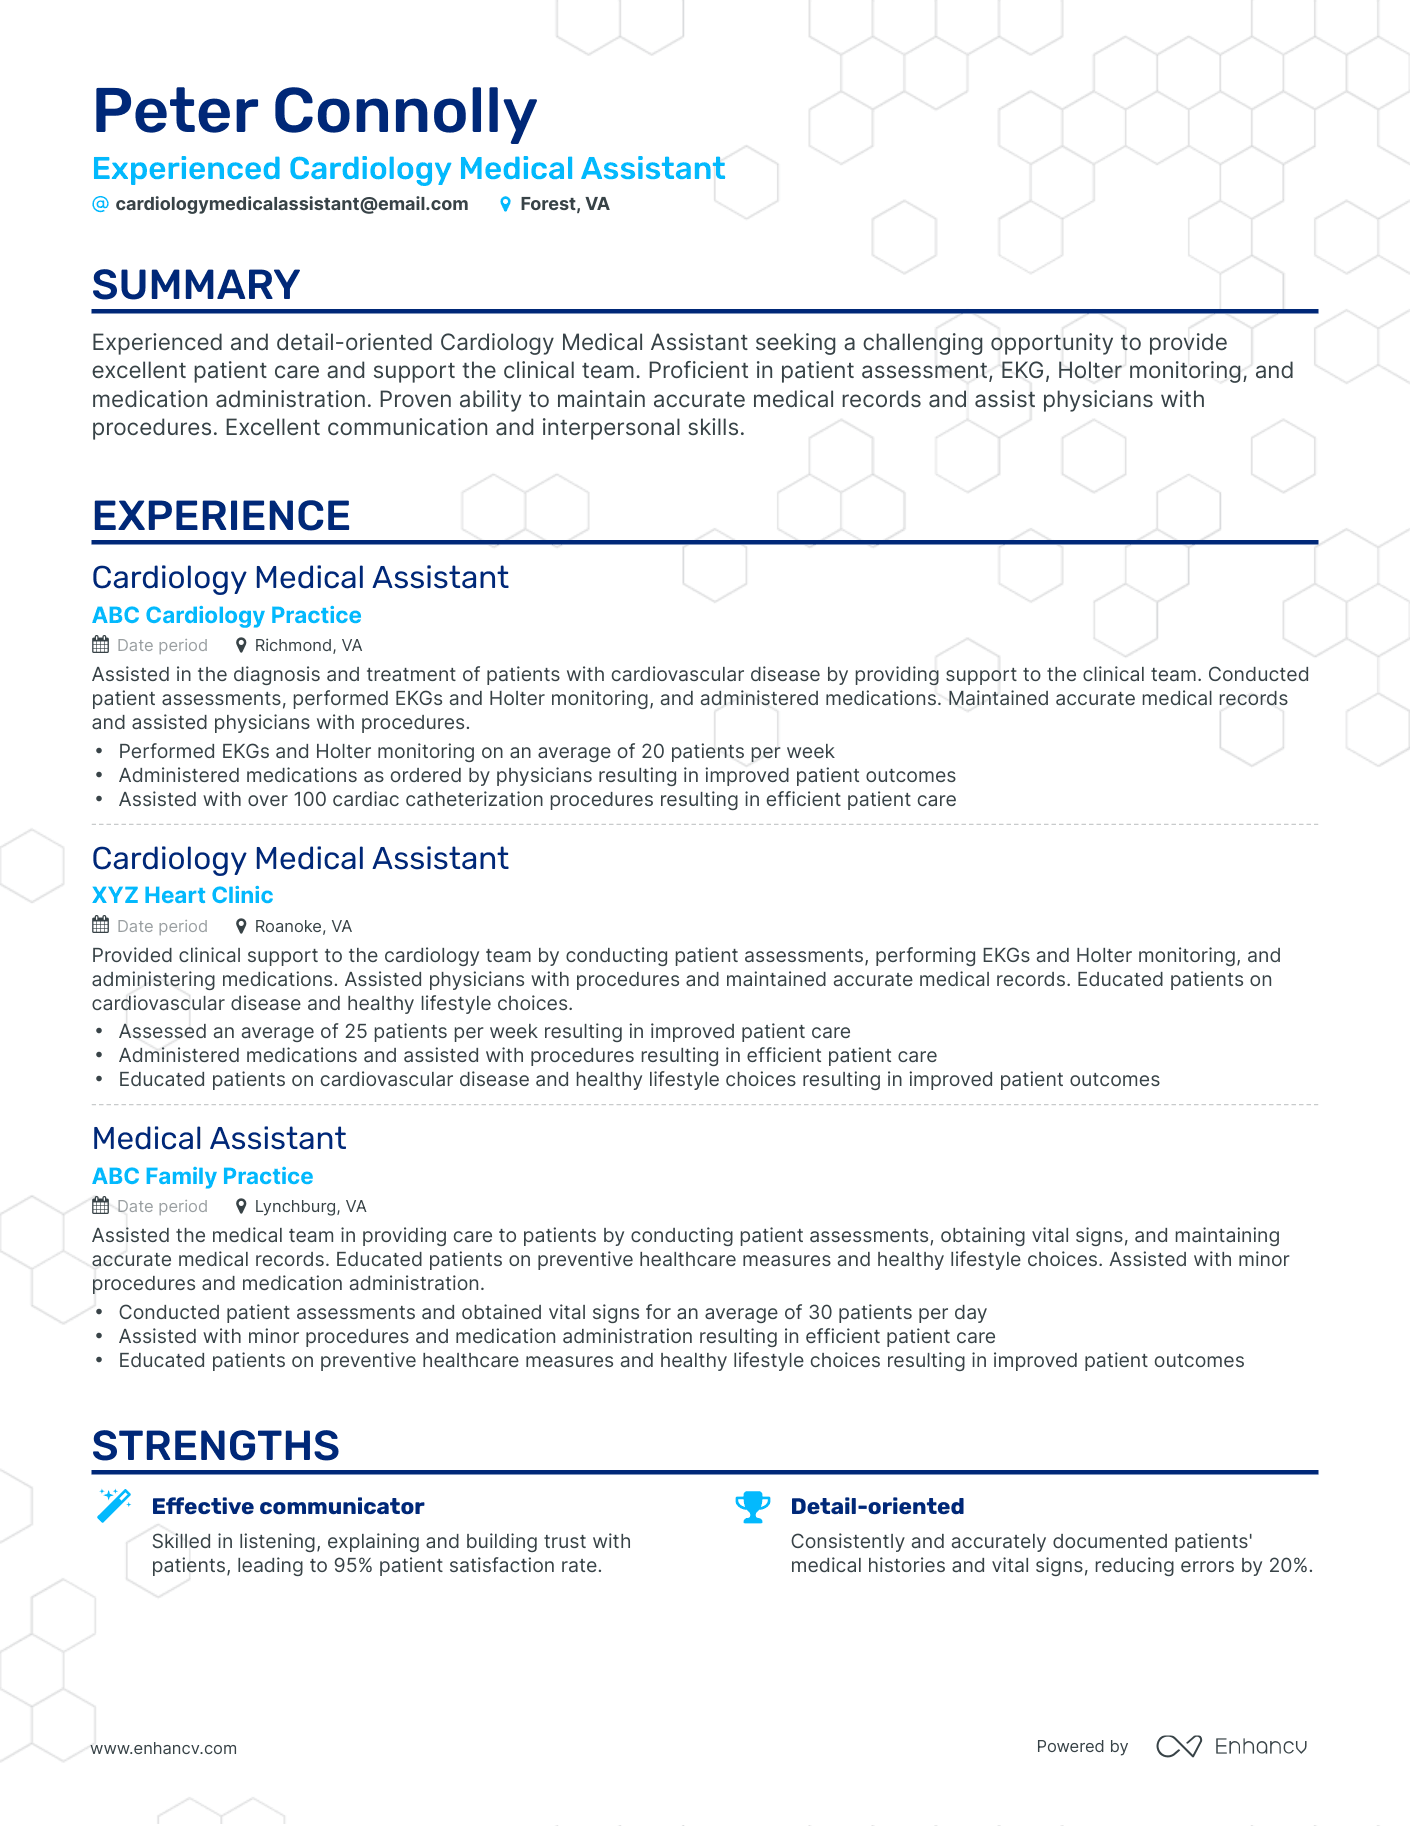 Classic Cardiology Medical Assistant Resume Template